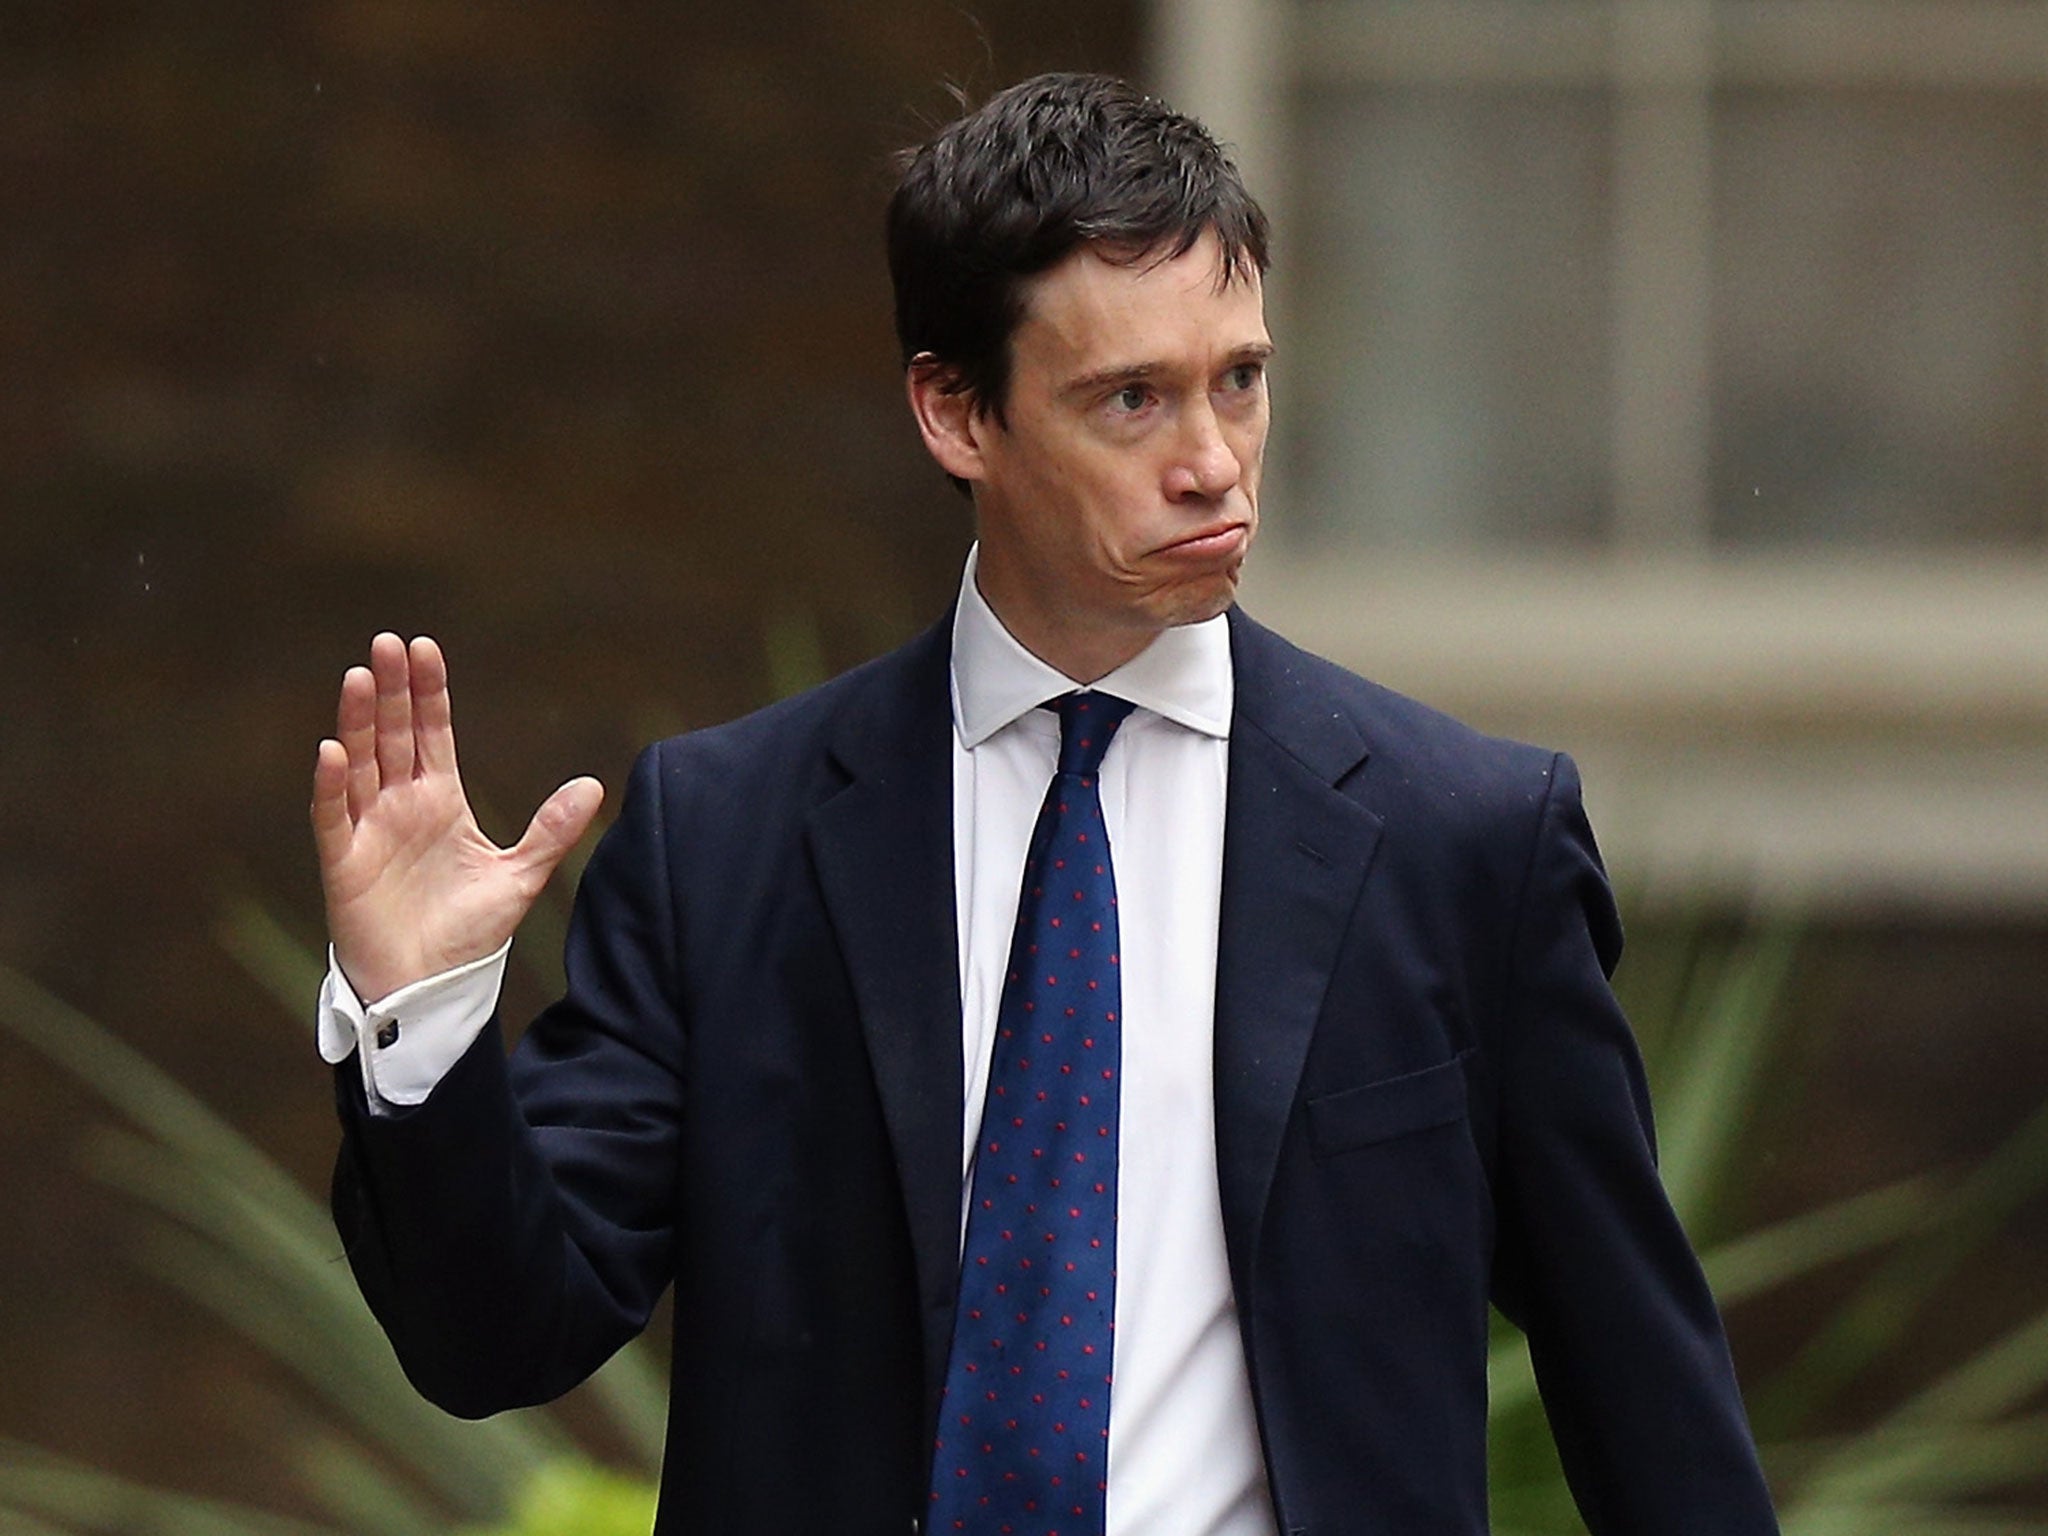 Prisons minister Rory Stewart gave himself 12 months to sort the problem out